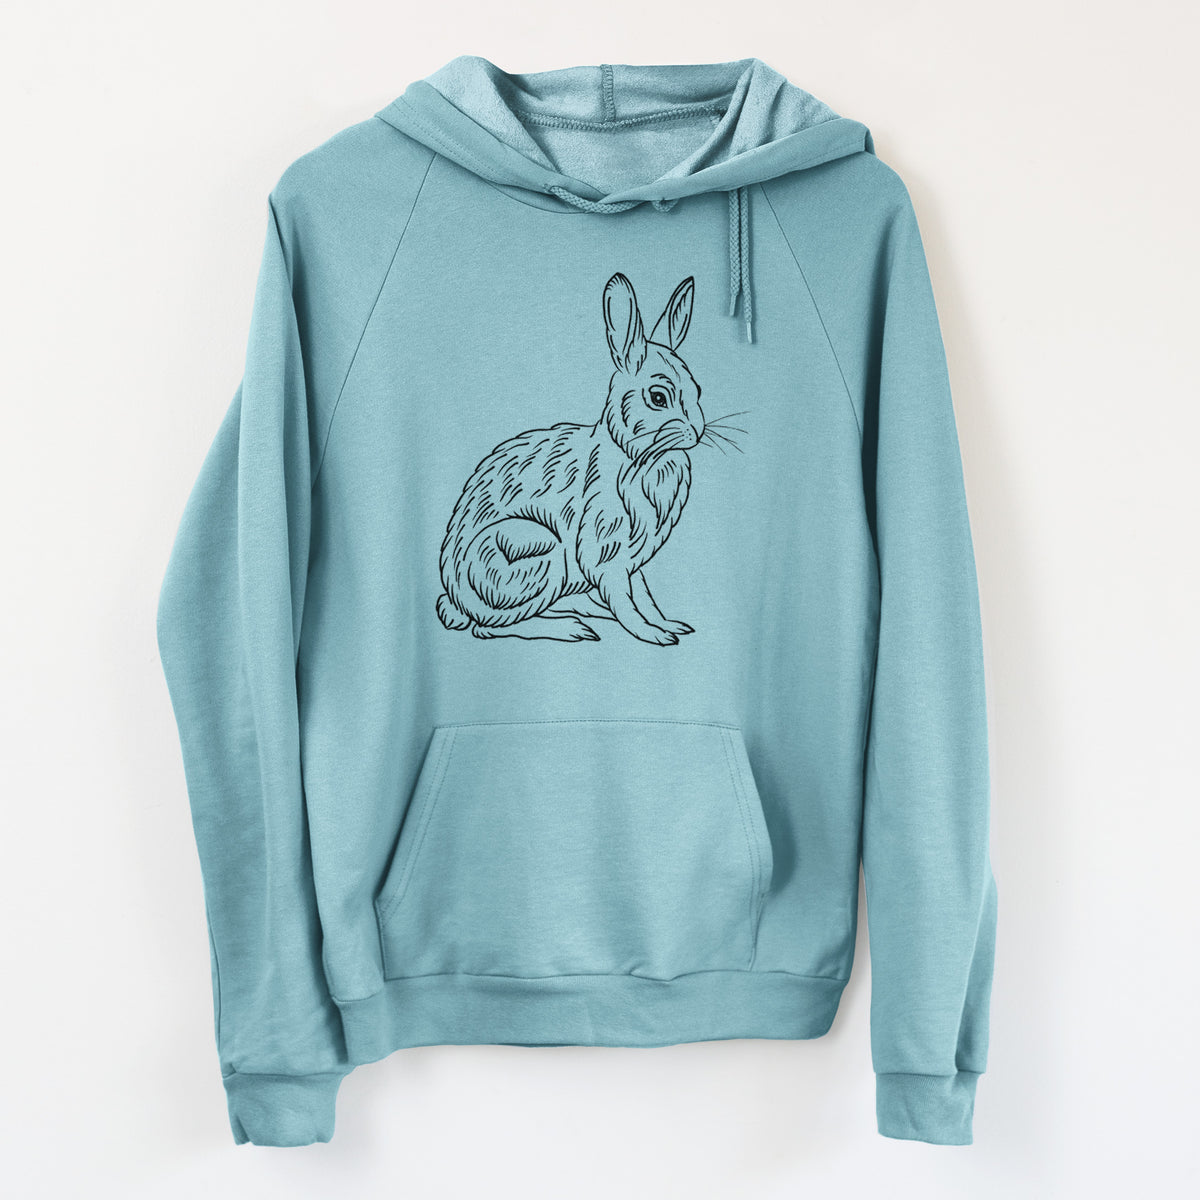 Snoeshoe Hare - Unisex Pullover Hoodie - Made in USA - 100% Organic Cotton